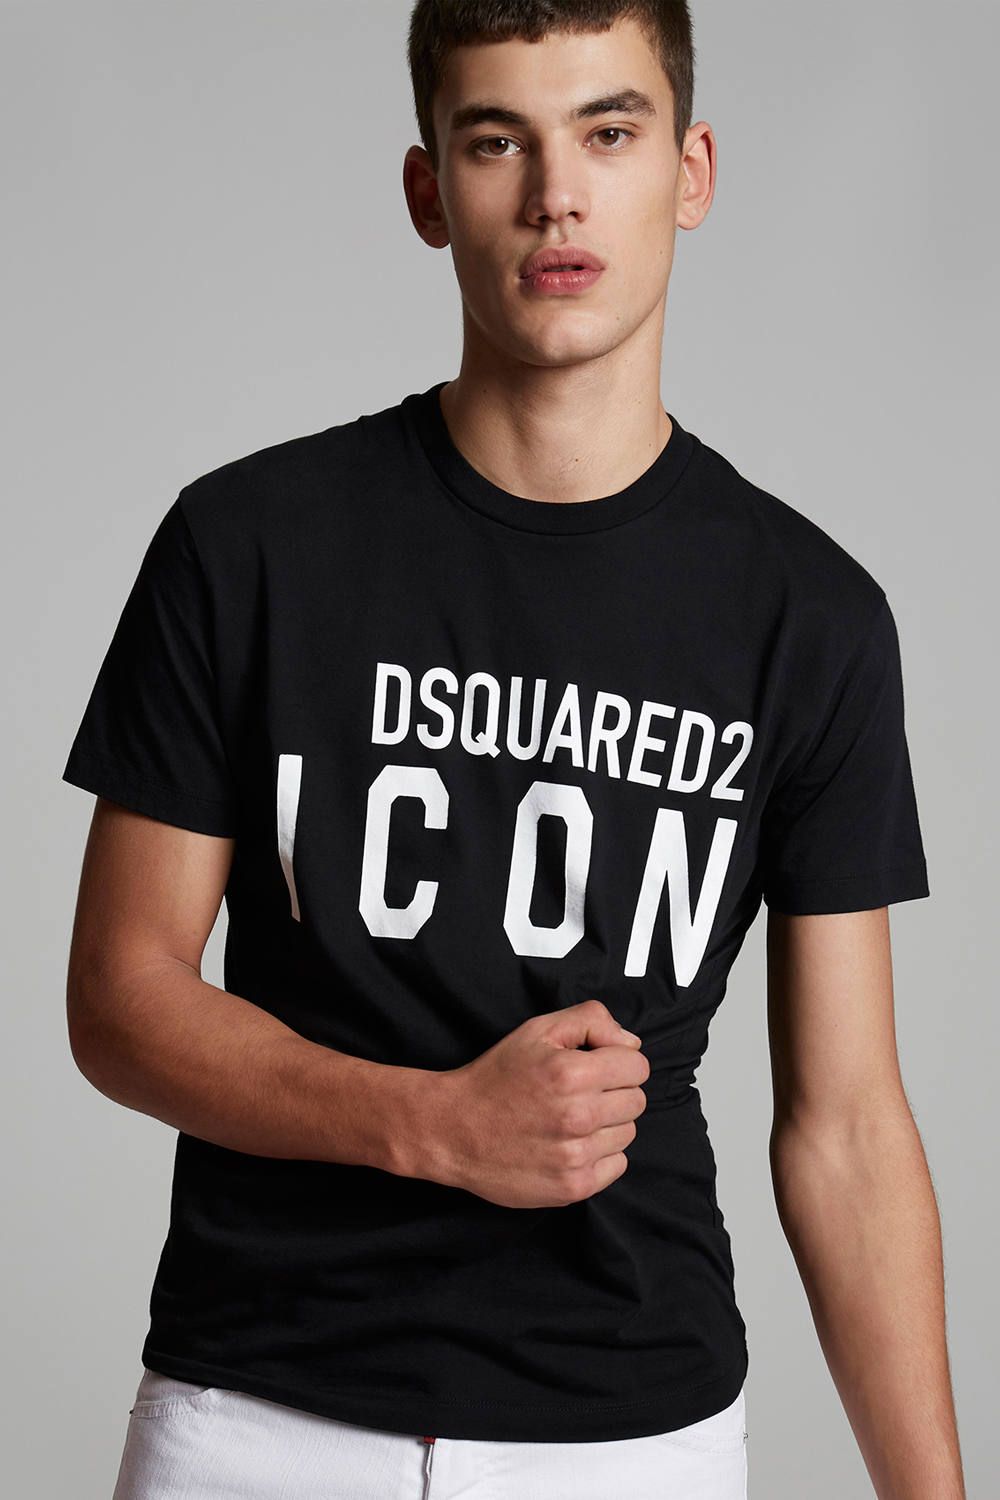 Dsquared2 - DSQUARED2 T-SHIRT / ICONロゴ クルーネック 半袖T 